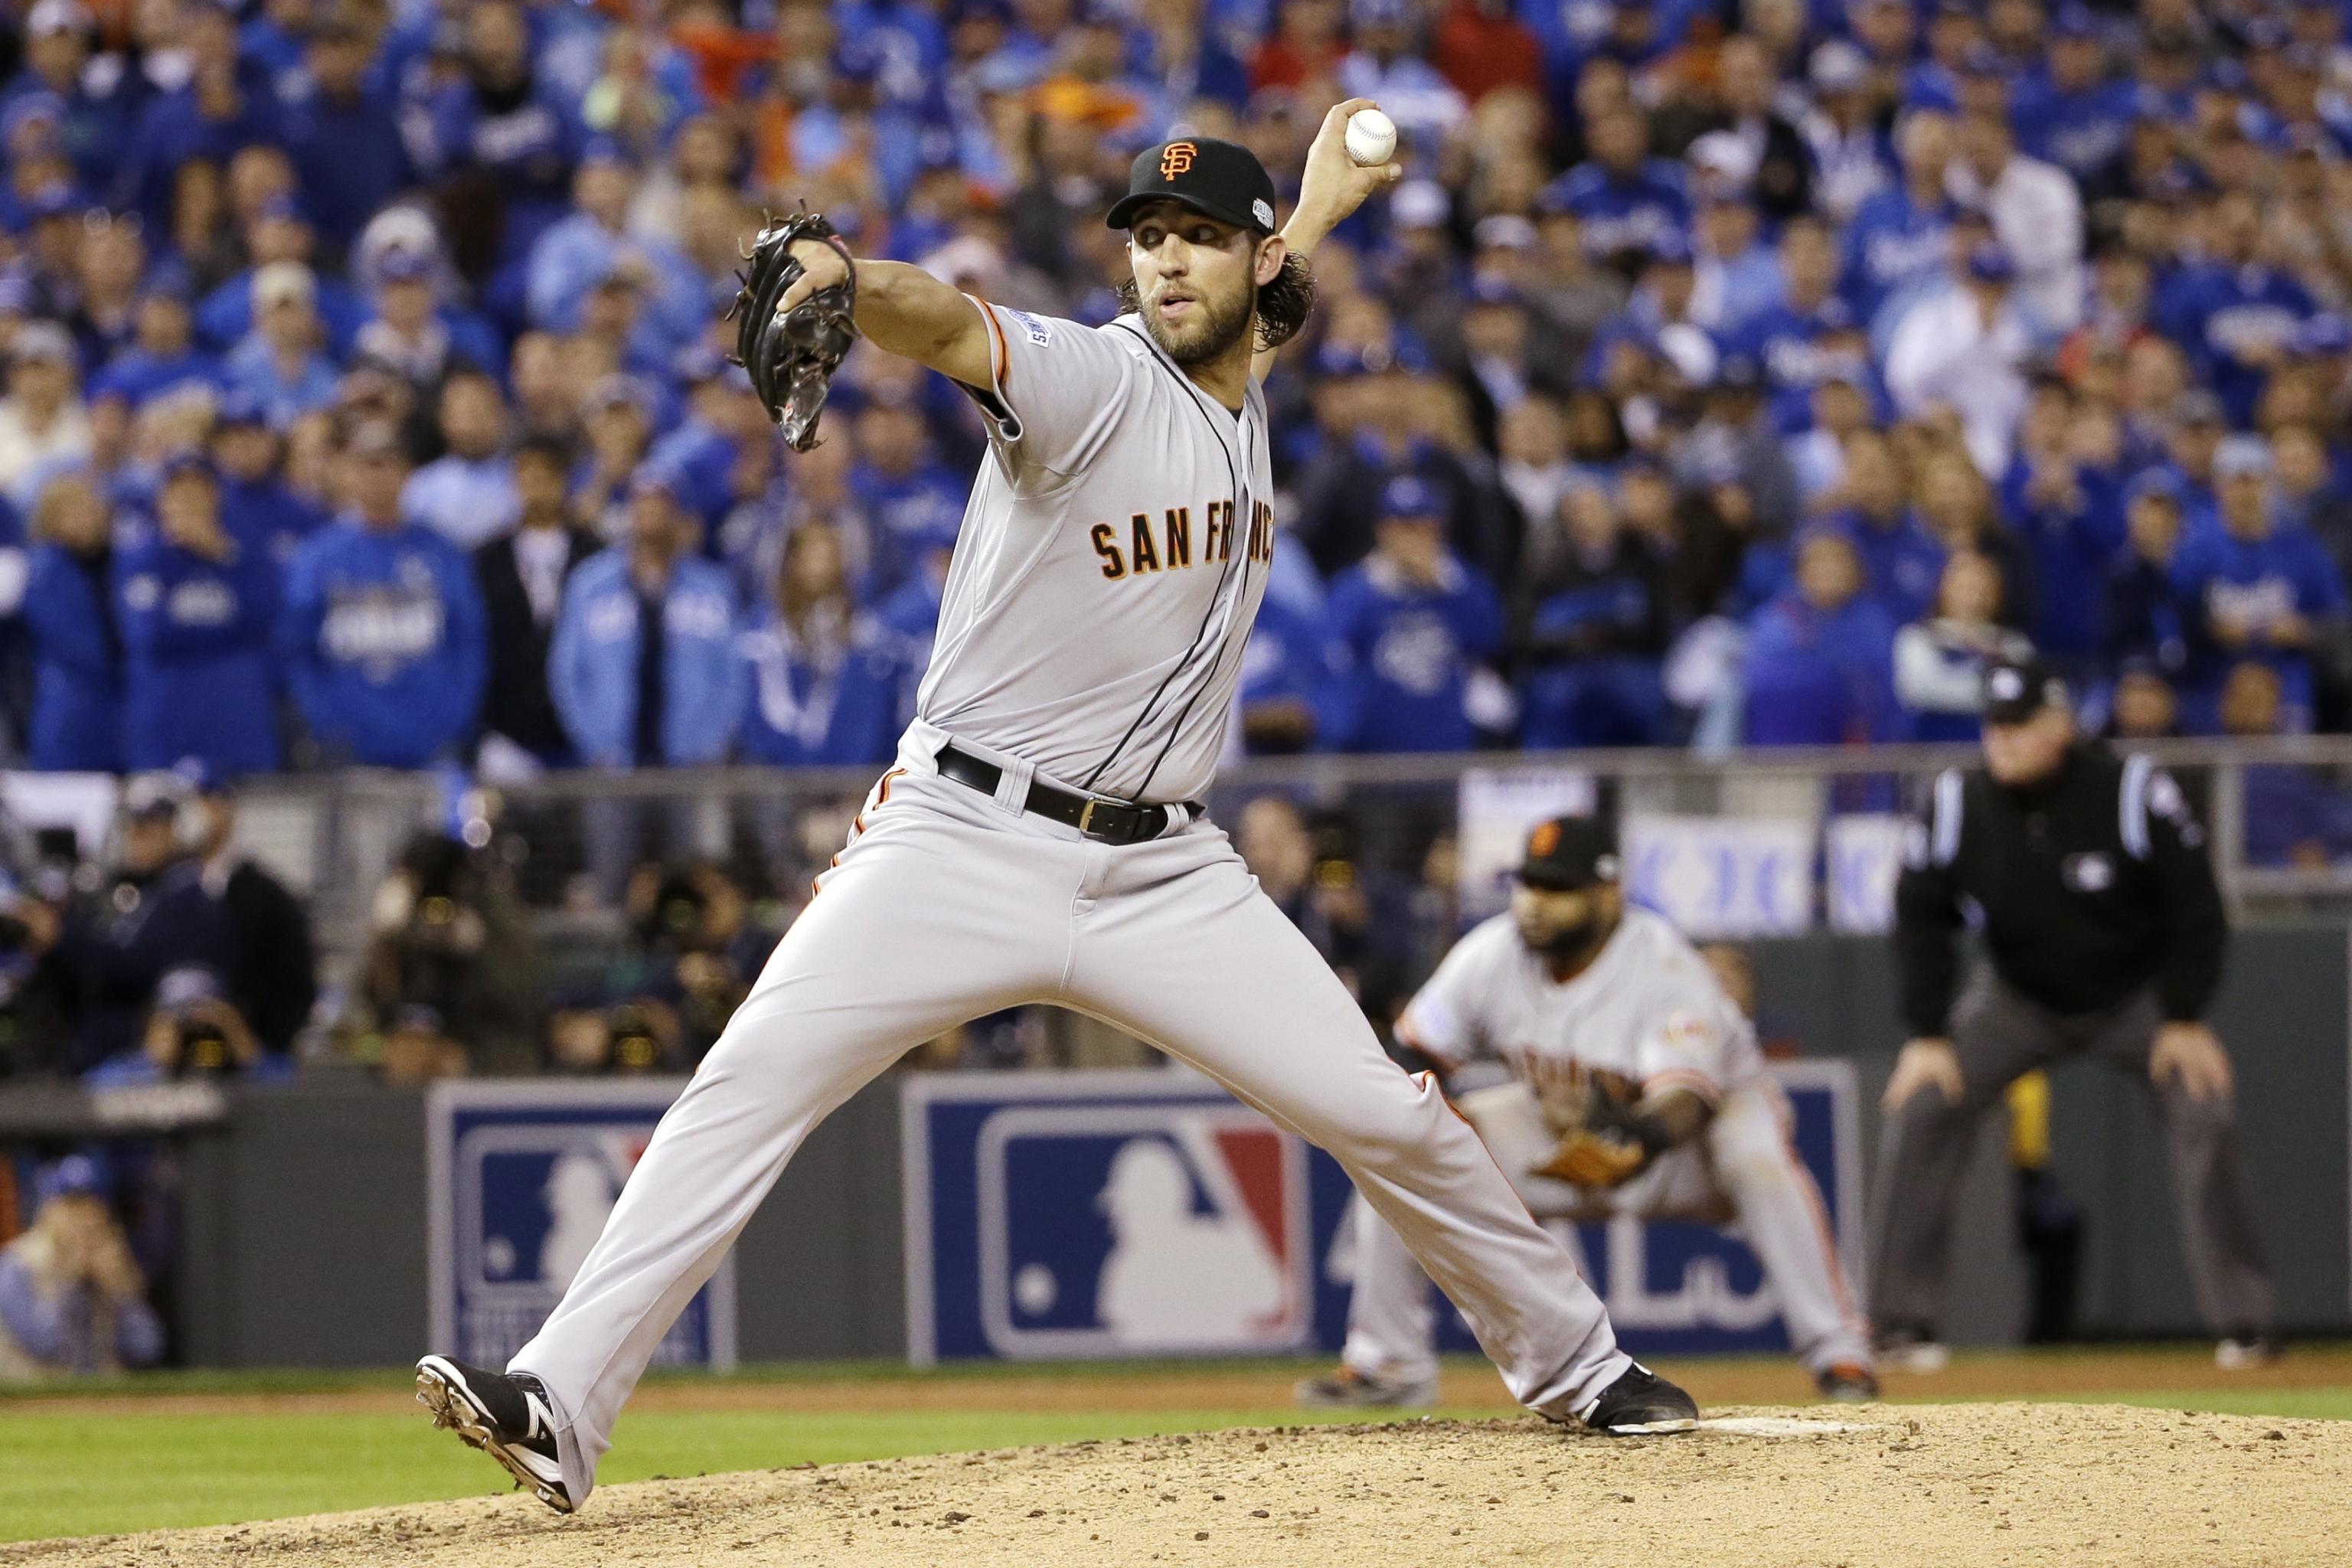 Madison Bumgarner is masterful as Giants win the World Series – Daily Breeze